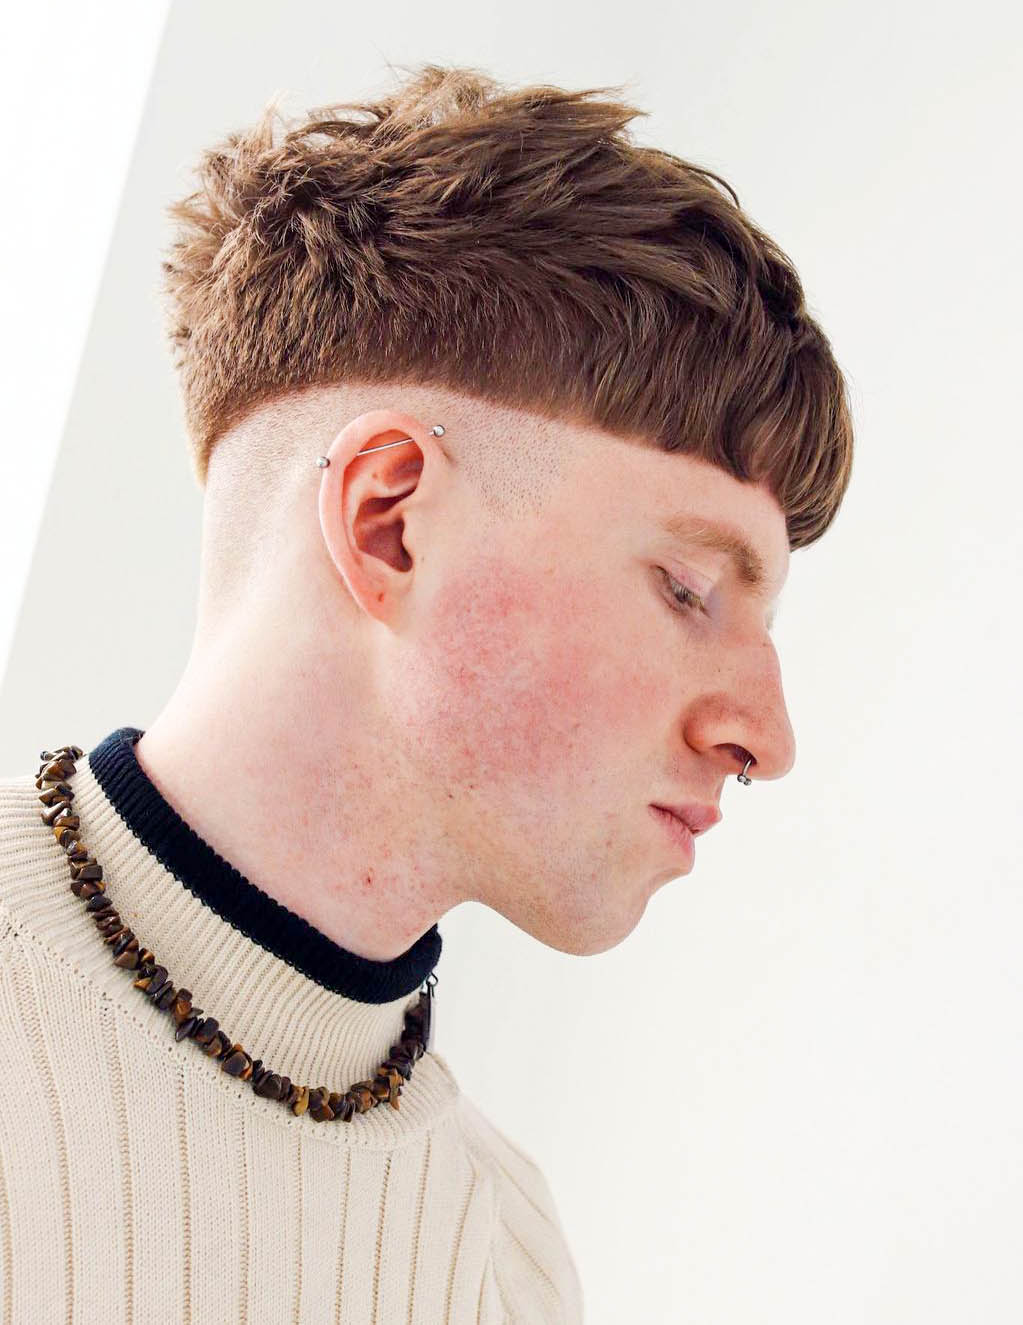 Top 10 Worst Haircuts Of All Time: Don't Get One Of These